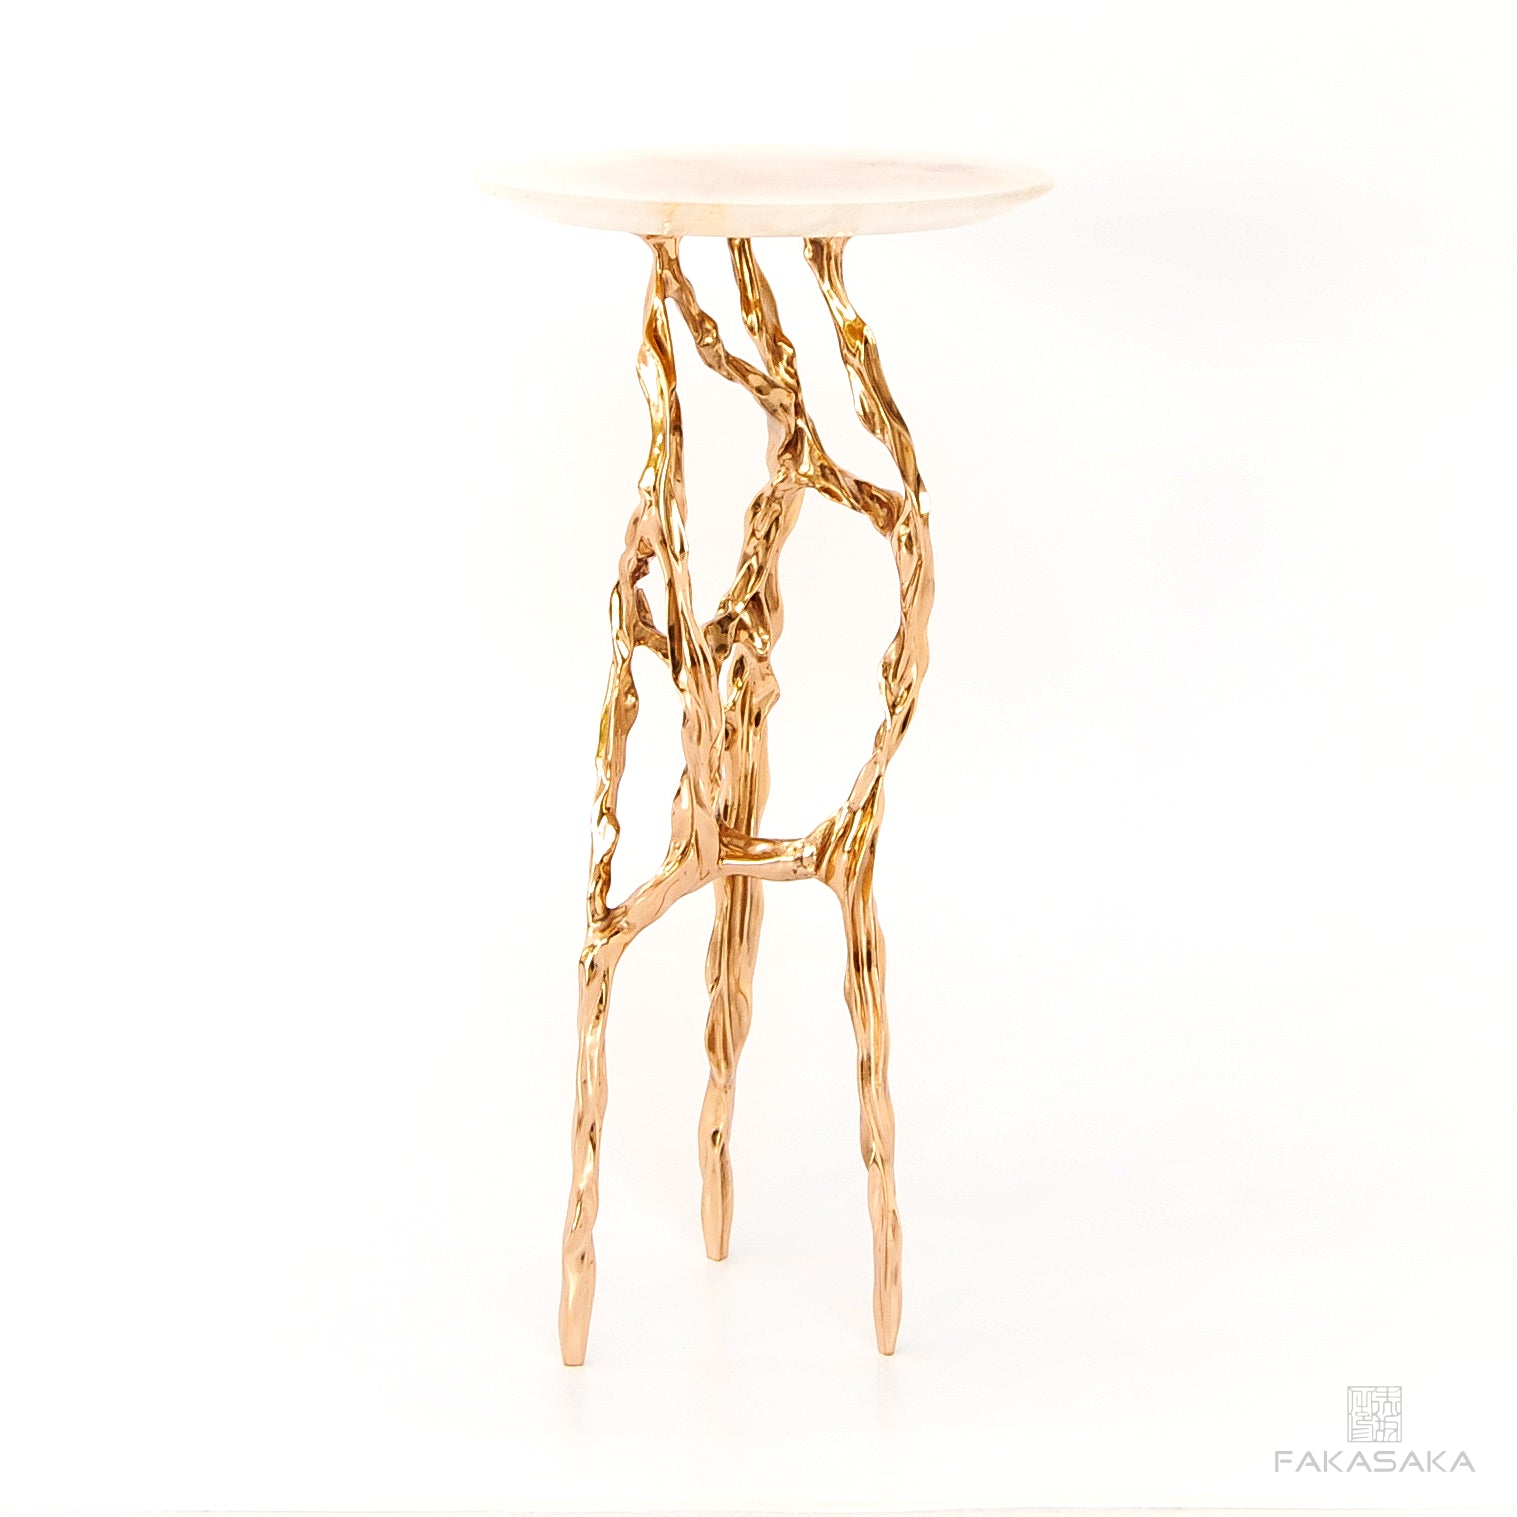 ALEXIA DRINK TABLE<br><br>TRANSLUCENT ONYX<br>POLISHED BRONZE